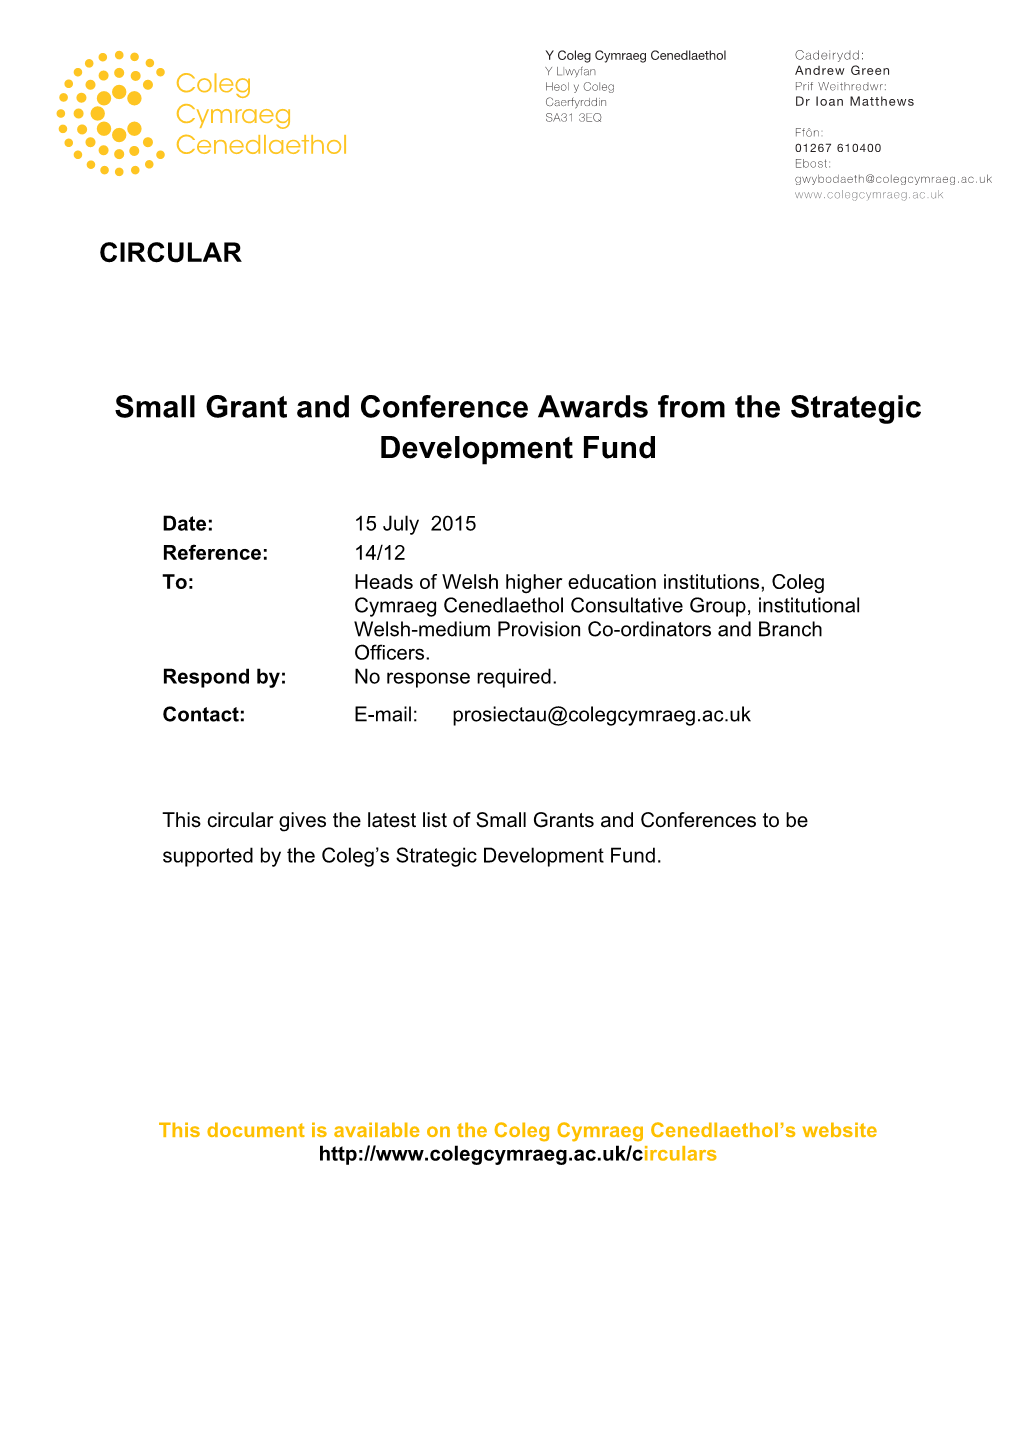 Circular Small Grant and Conference Awards from the Strategic Development Fund